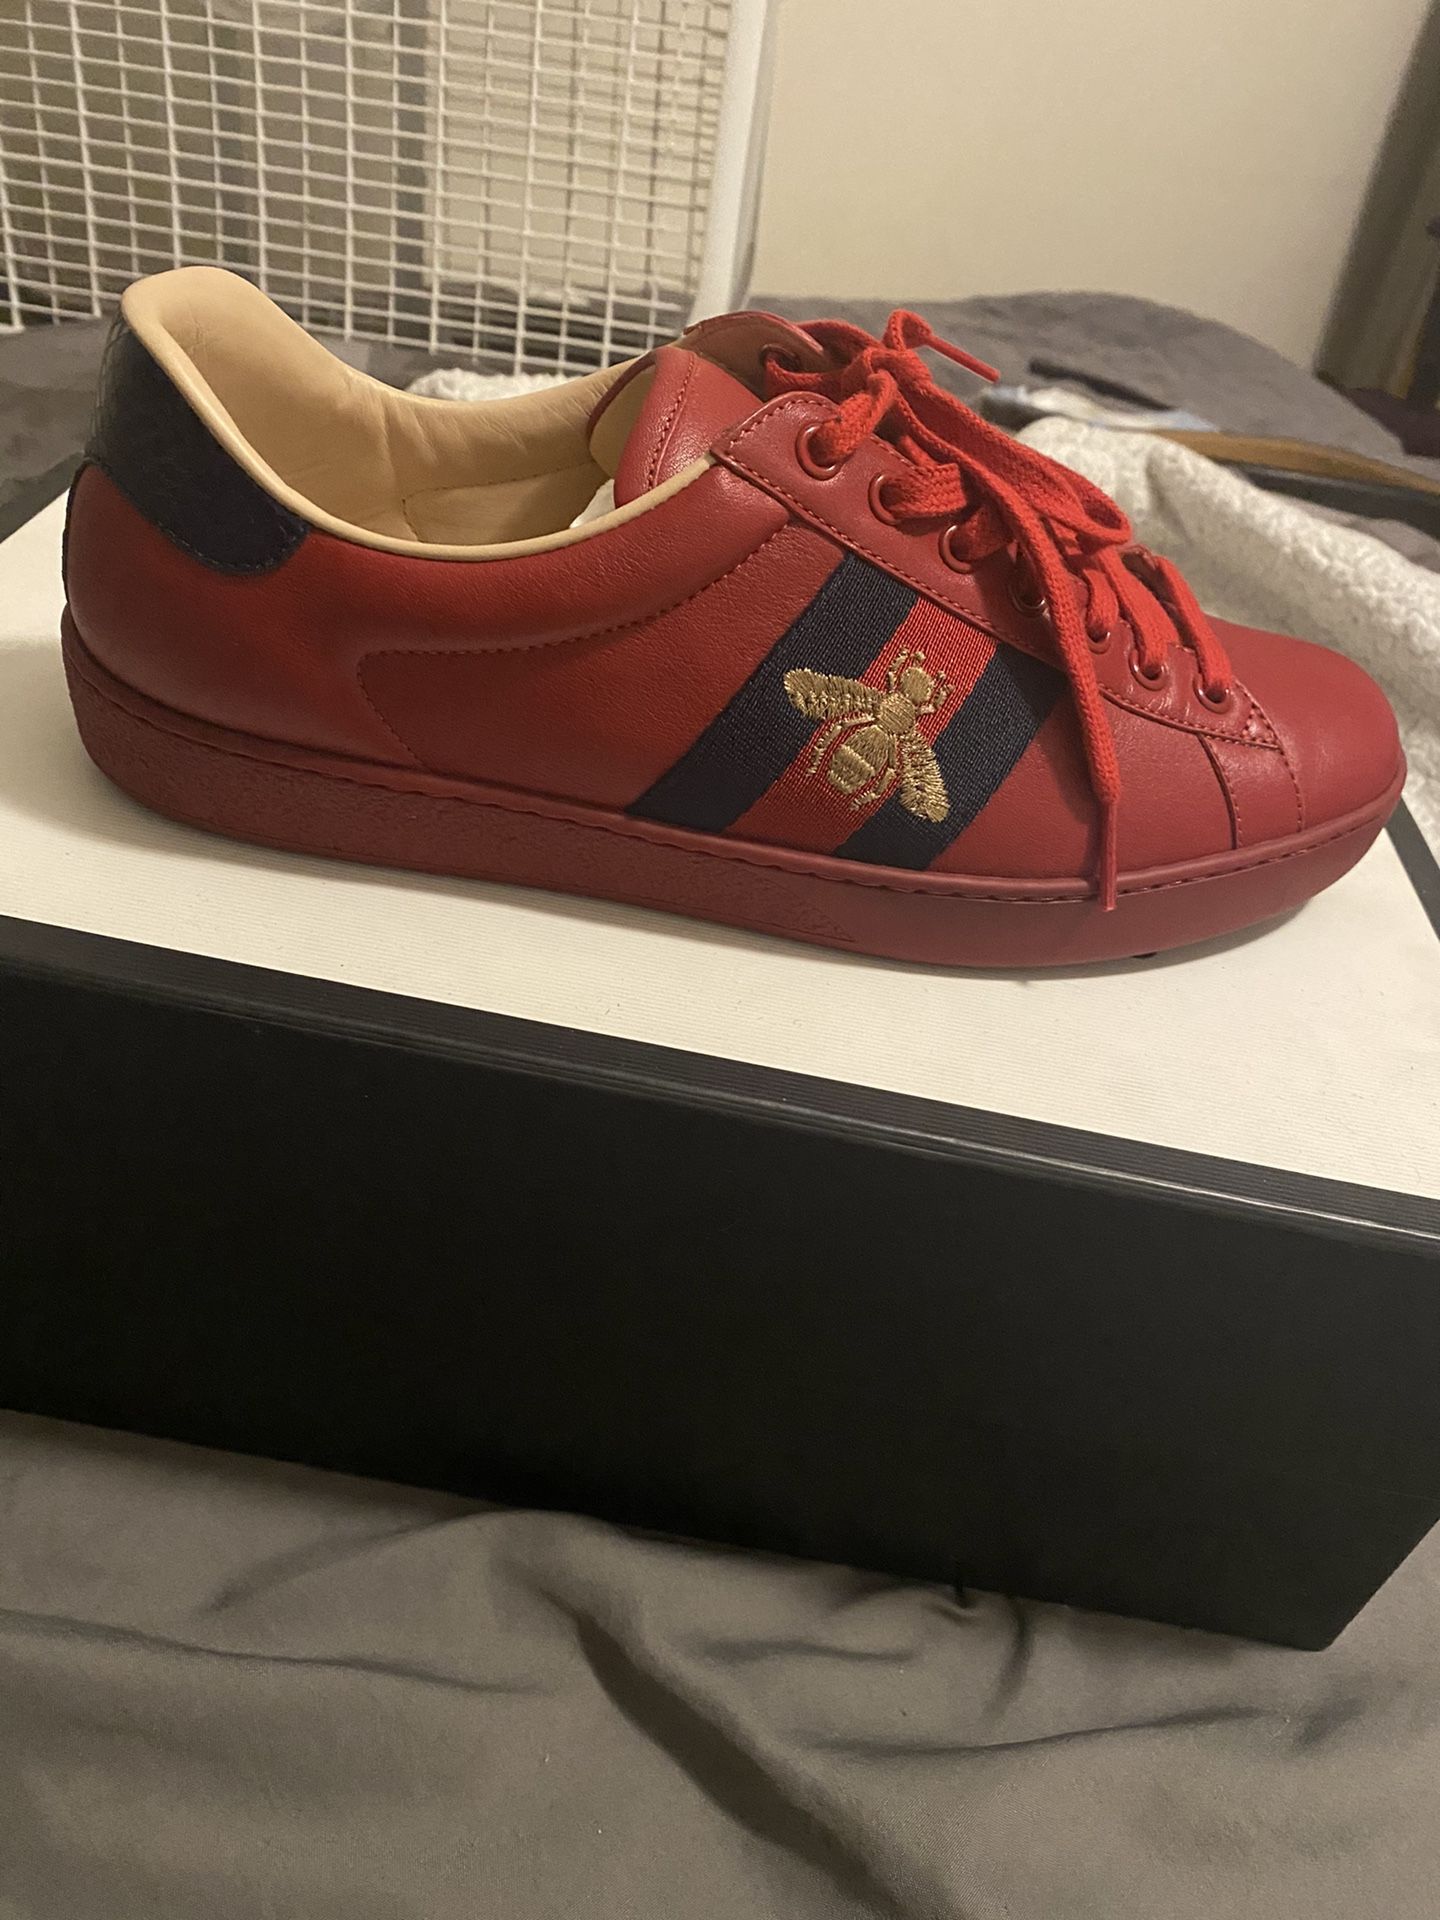 Red Gucci Sneakers size 8.5